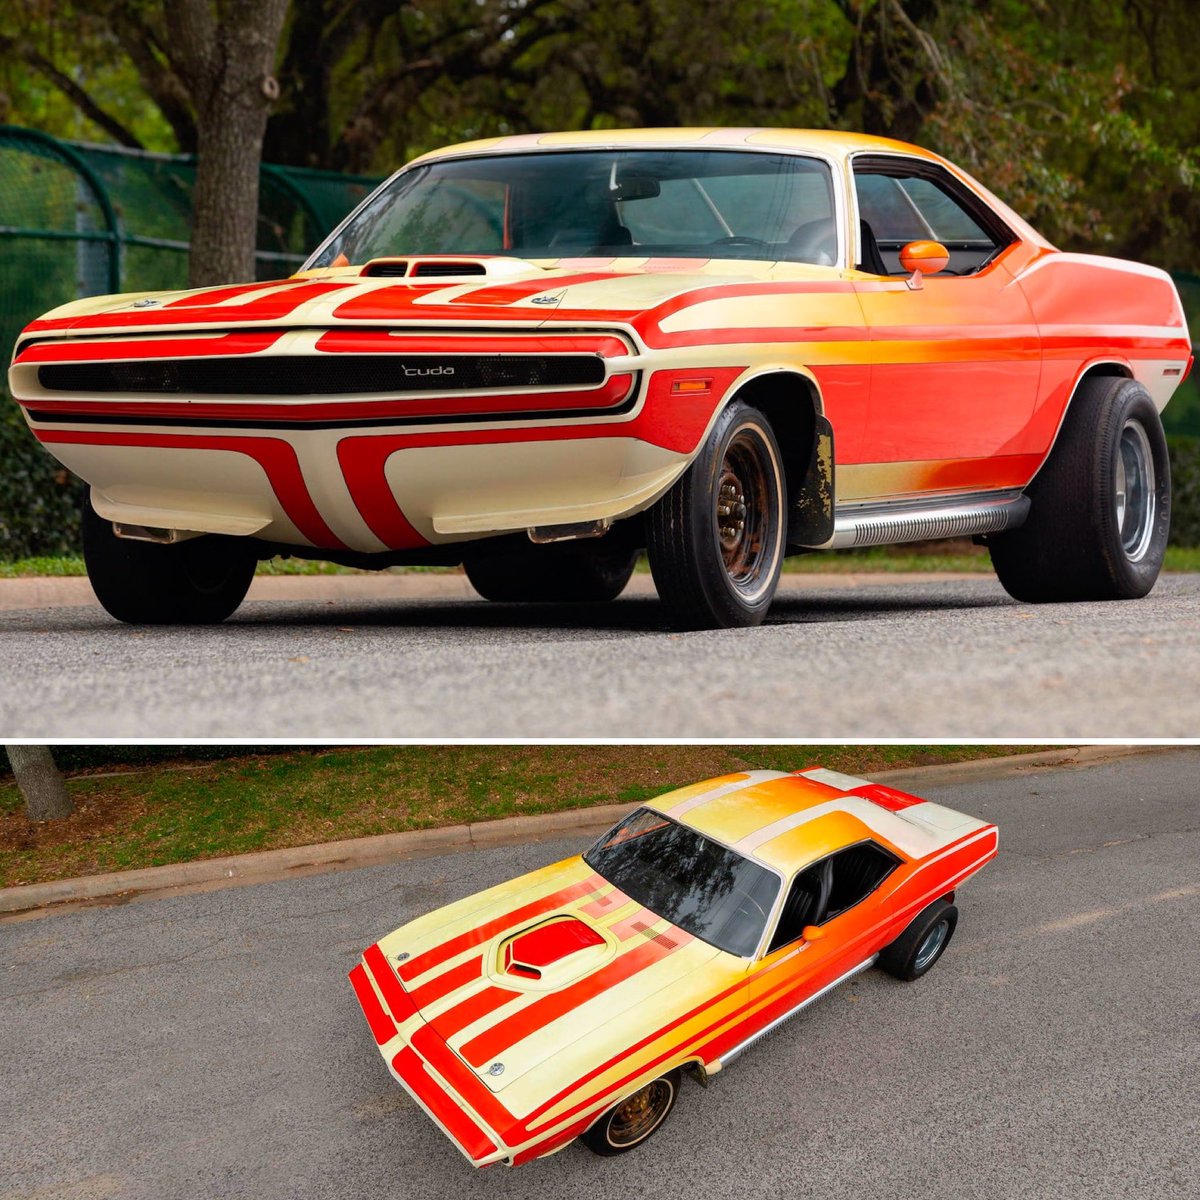 Hidden For 50 Years: The Plymouth Cuda 440 Rapid Transit From 1971

Link: silodrome.com/plymouth-cuda-…

@mecum #plymouth #cardesign #v8 #musclecar